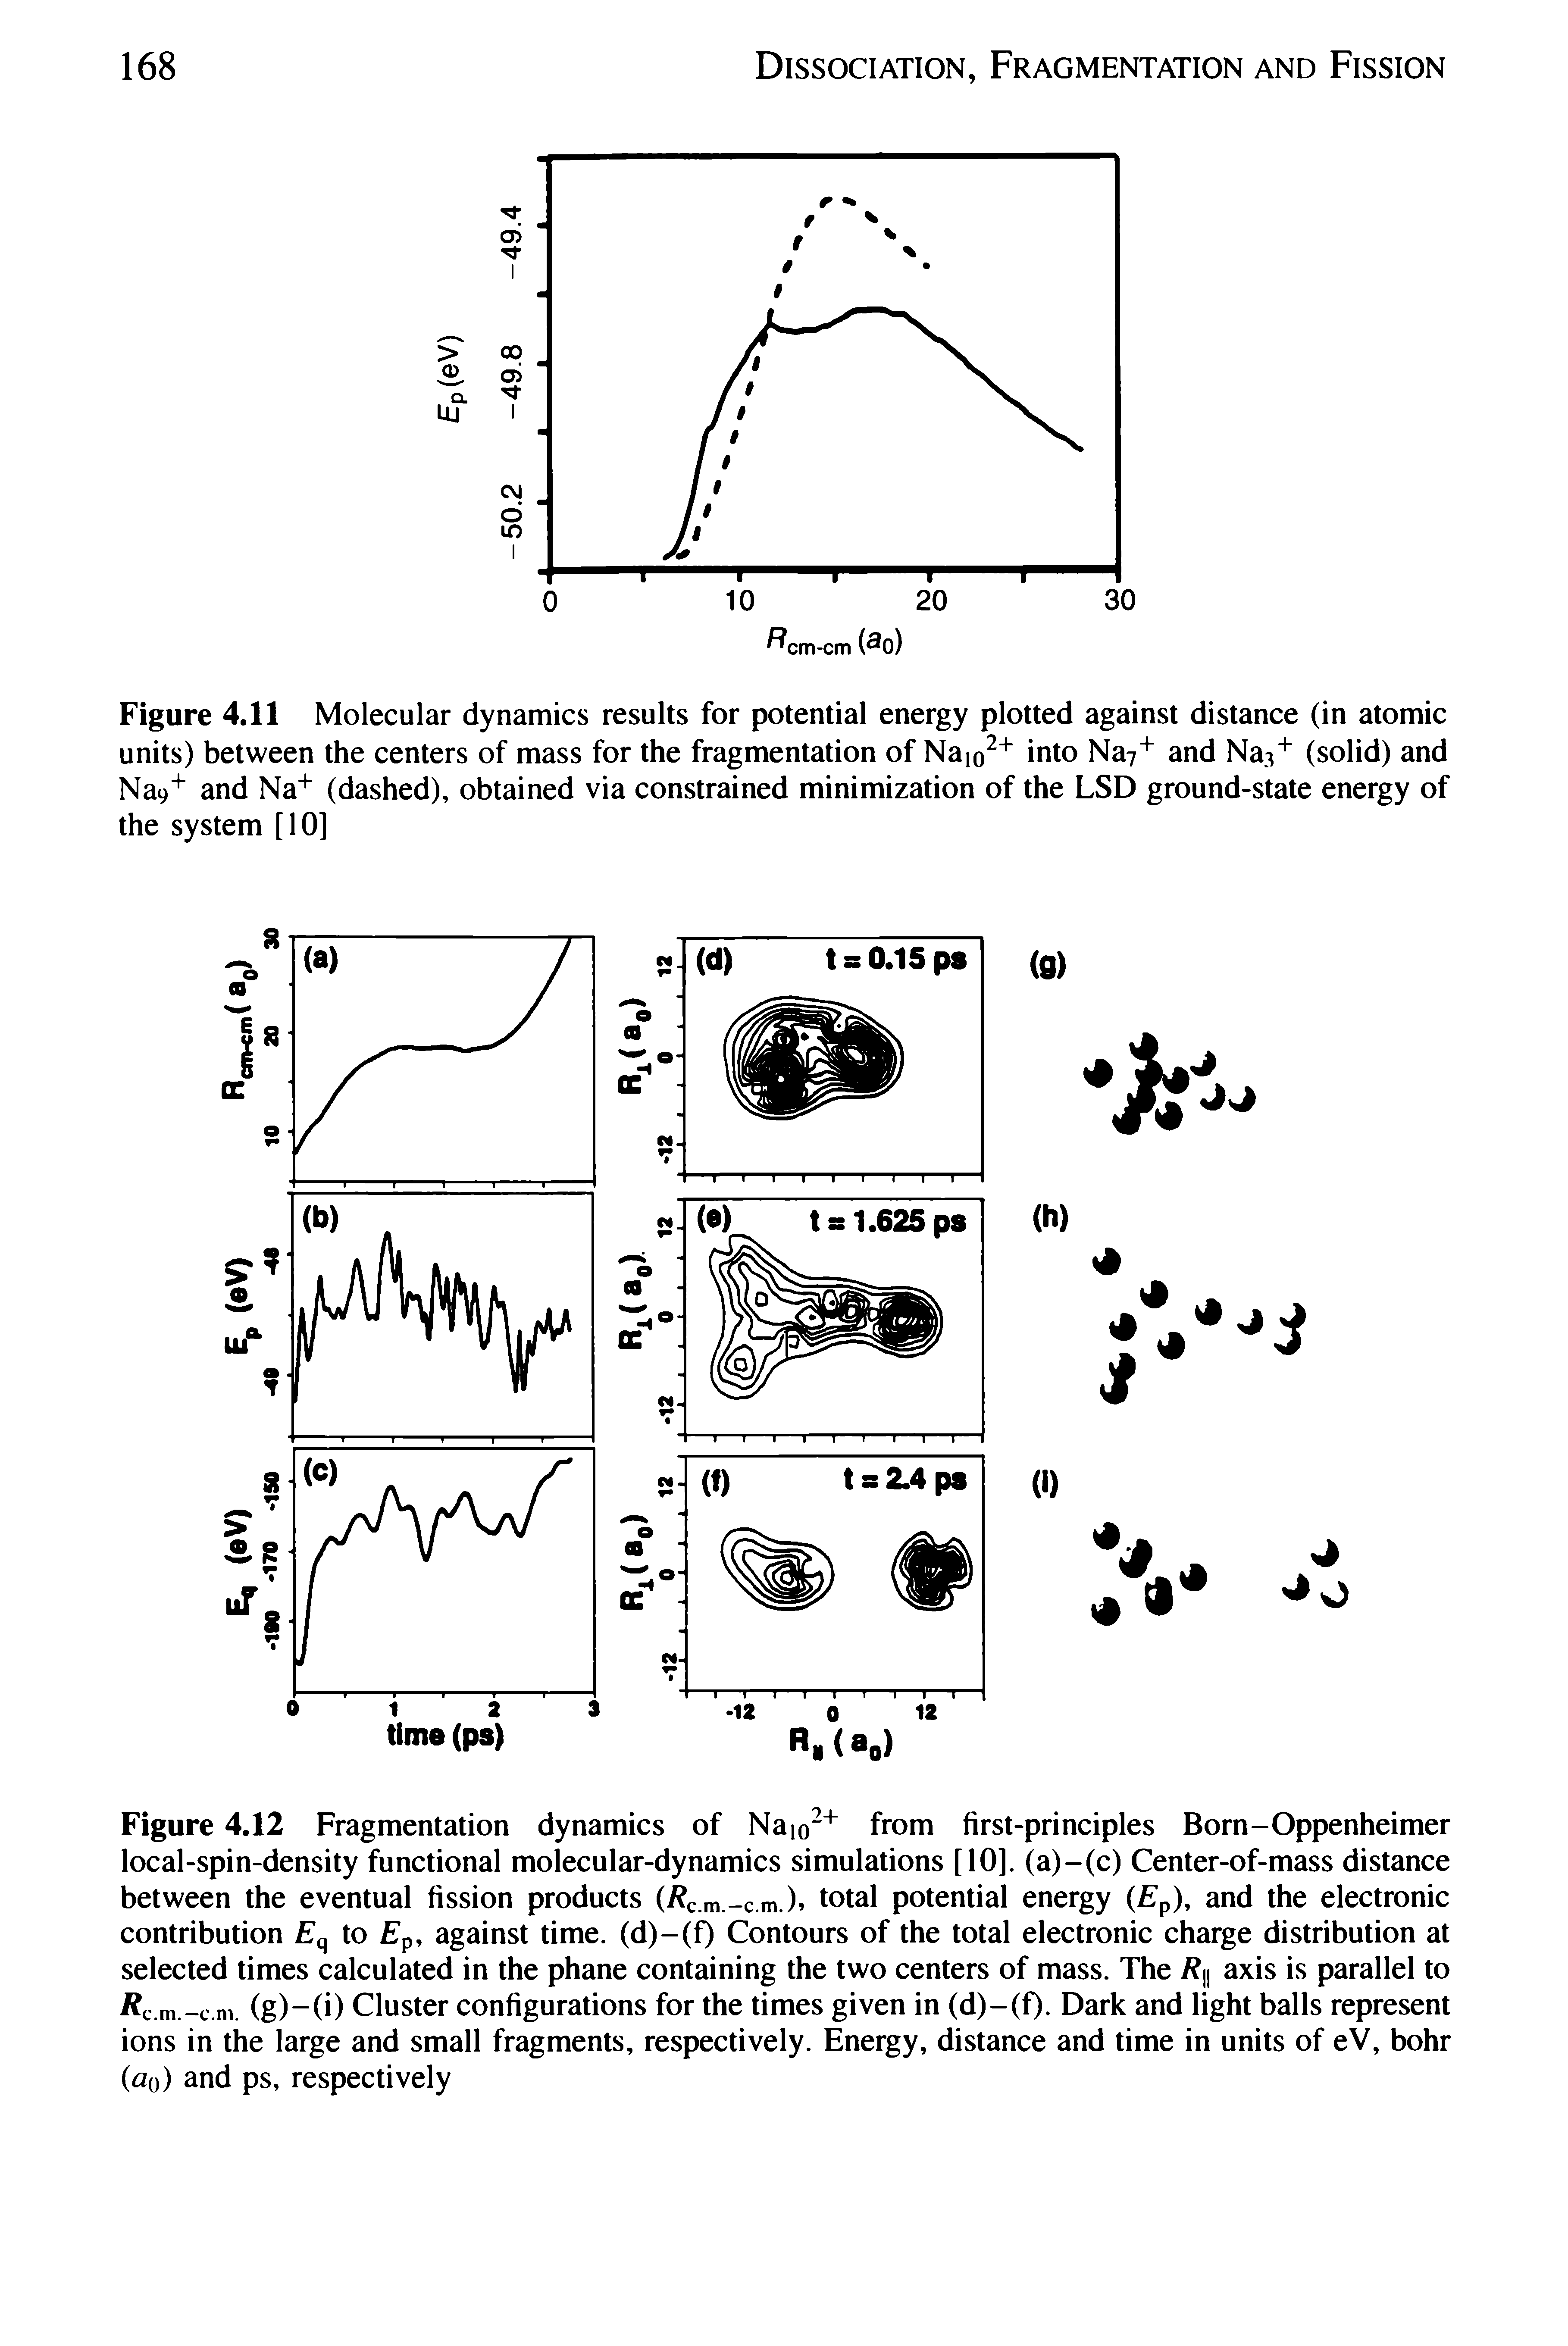 Figure 4.11 Molecular dynamics results for potential energy plotted against distance (in atomic units) between the centers of mass for the fragmentation of Naio into Na7 and Na.i (solid) and Na9" and Na (dashed), obtained via constrained minimization of the LSD ground-state energy of the system [10]...